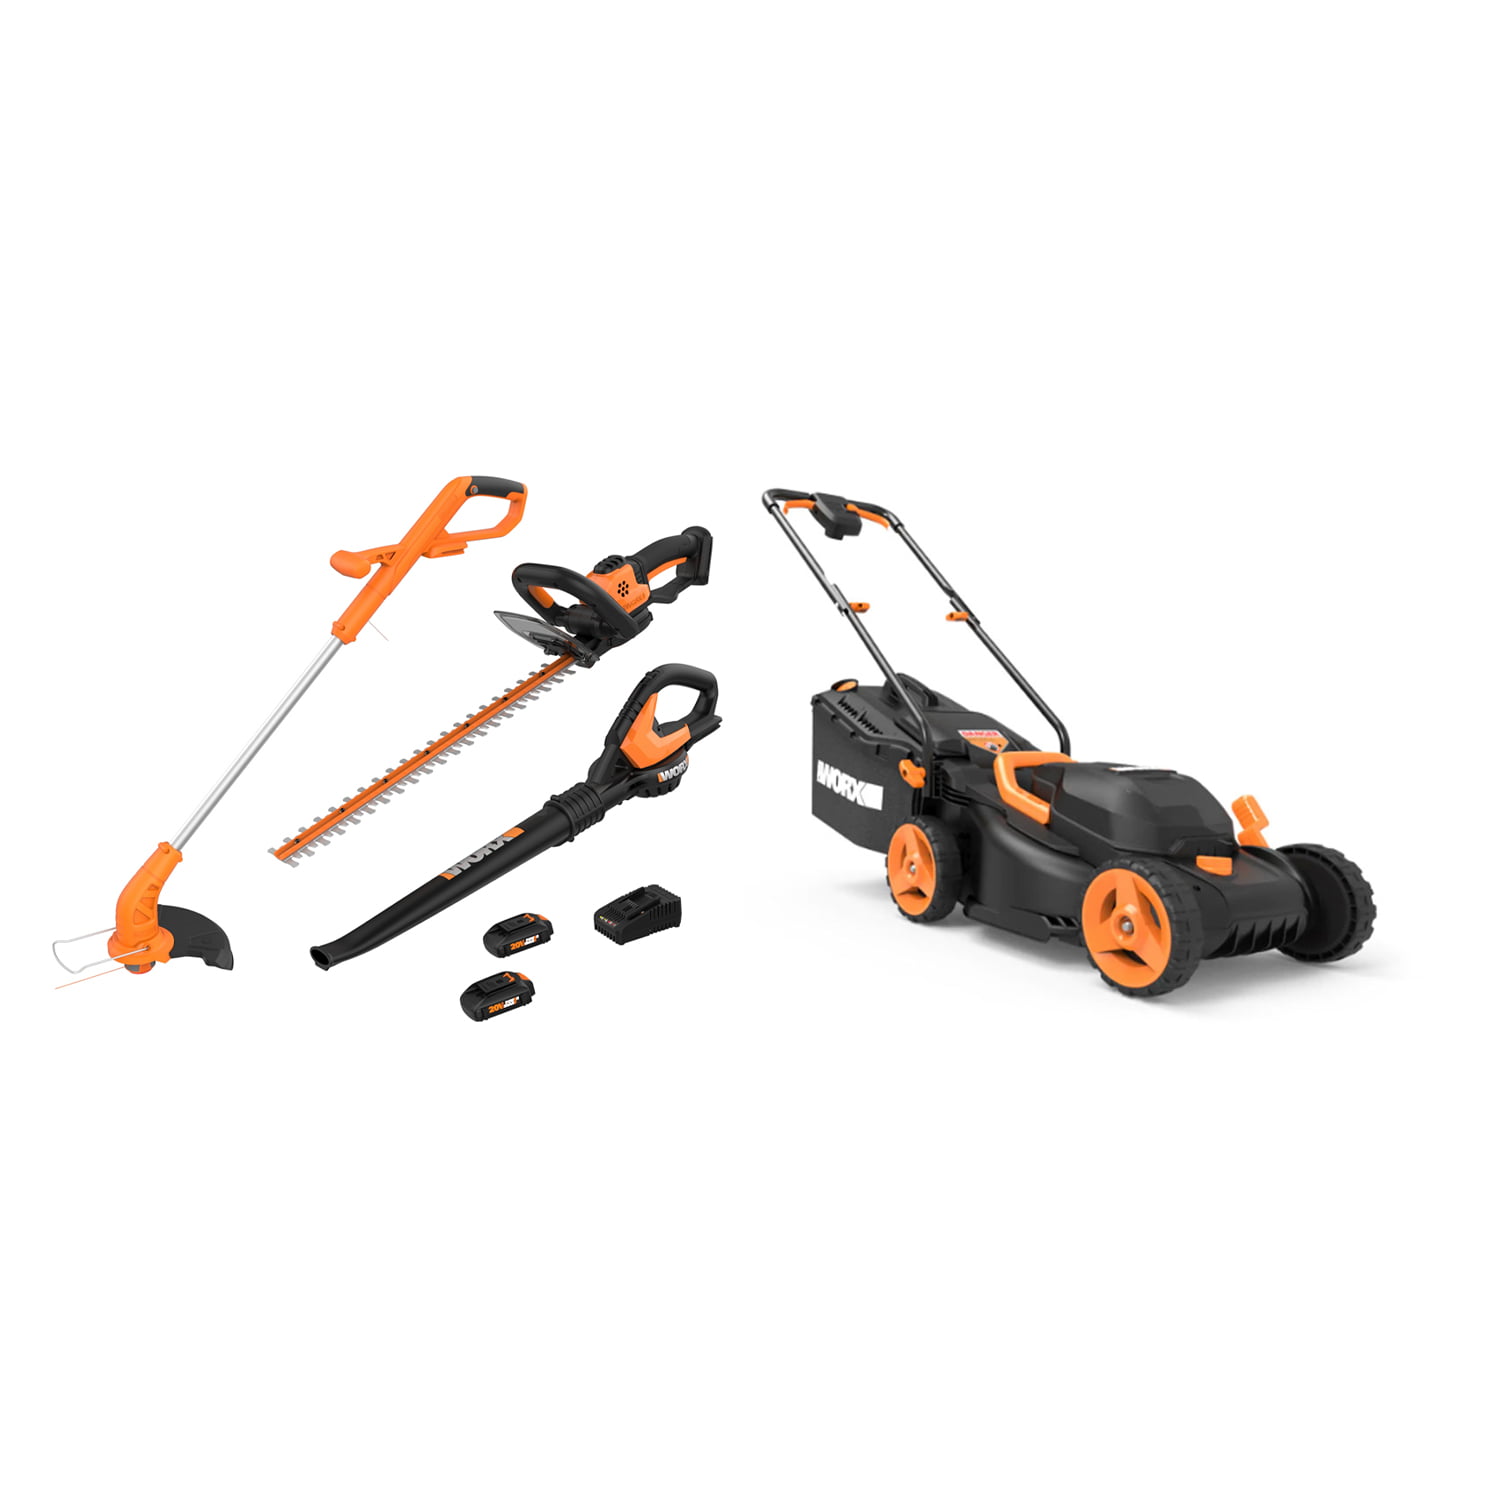 WORX 2-in-1 Trimmer & Edger Lawn Equipment Combo and 40 Volt Electric ...